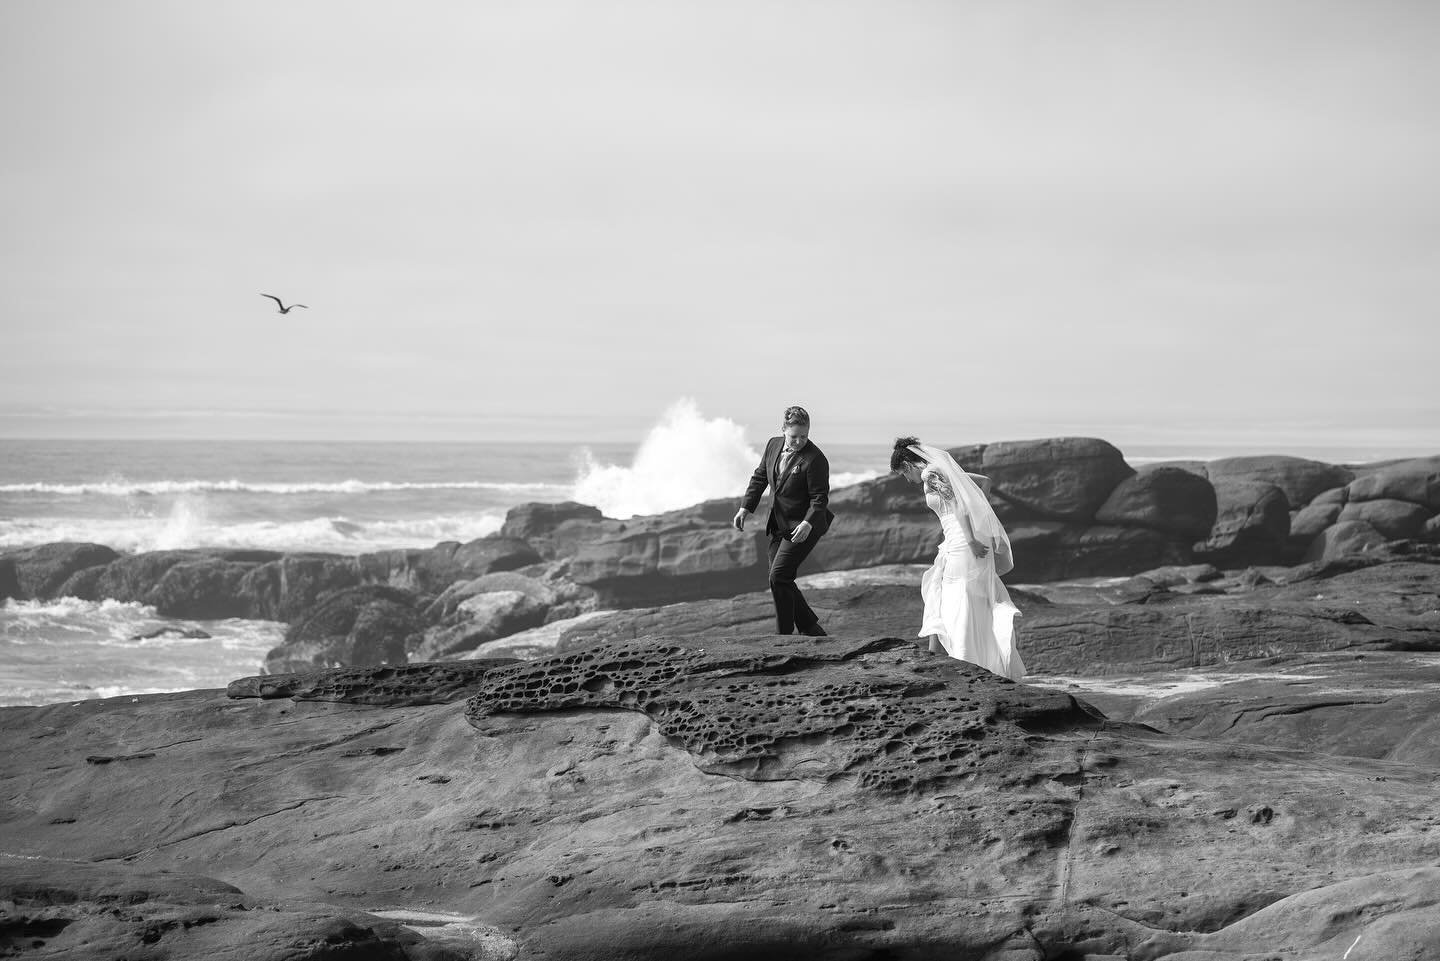 I&rsquo;m off on a weekend adventure and am wrapping up Blake and Kaiden&rsquo;s Yachats elopement gallery. I can&rsquo;t wait to deliver it!